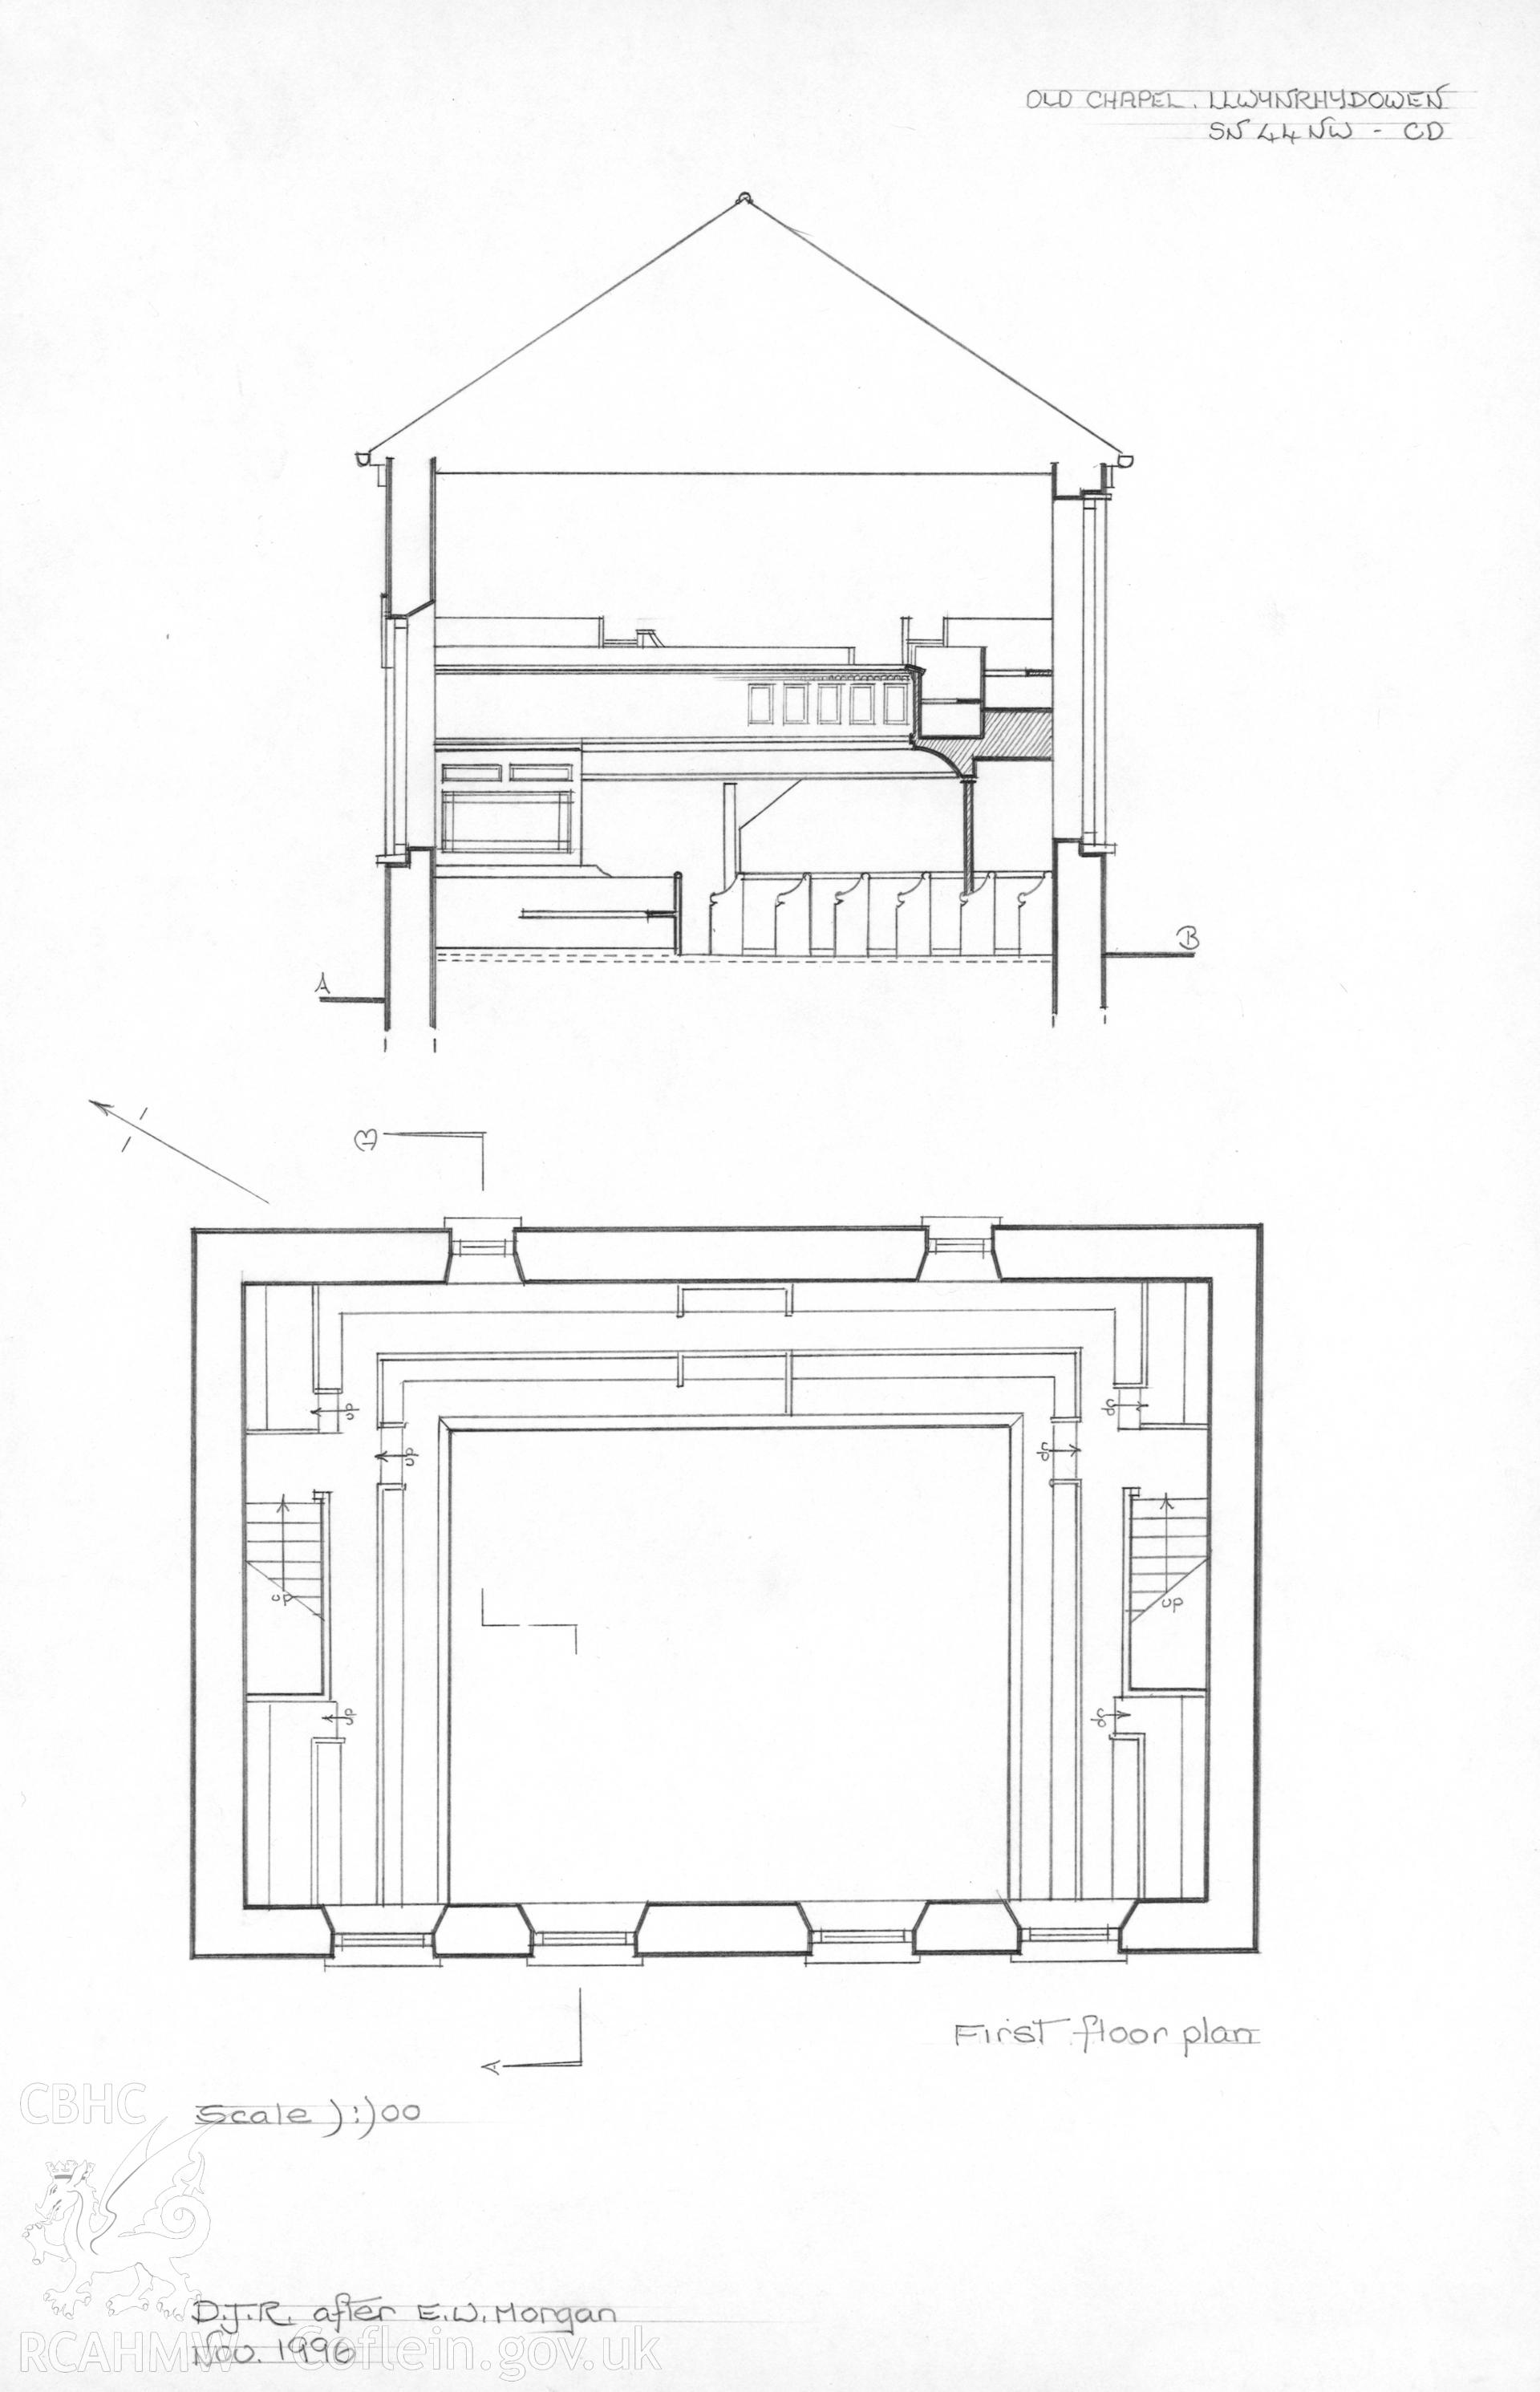 Llwynrhydowen Old Chapel, Llandysul; Pencil drawing comprising first floor plan & section, by Dylan Roberts after E.W. Morgan, dated November 1996.